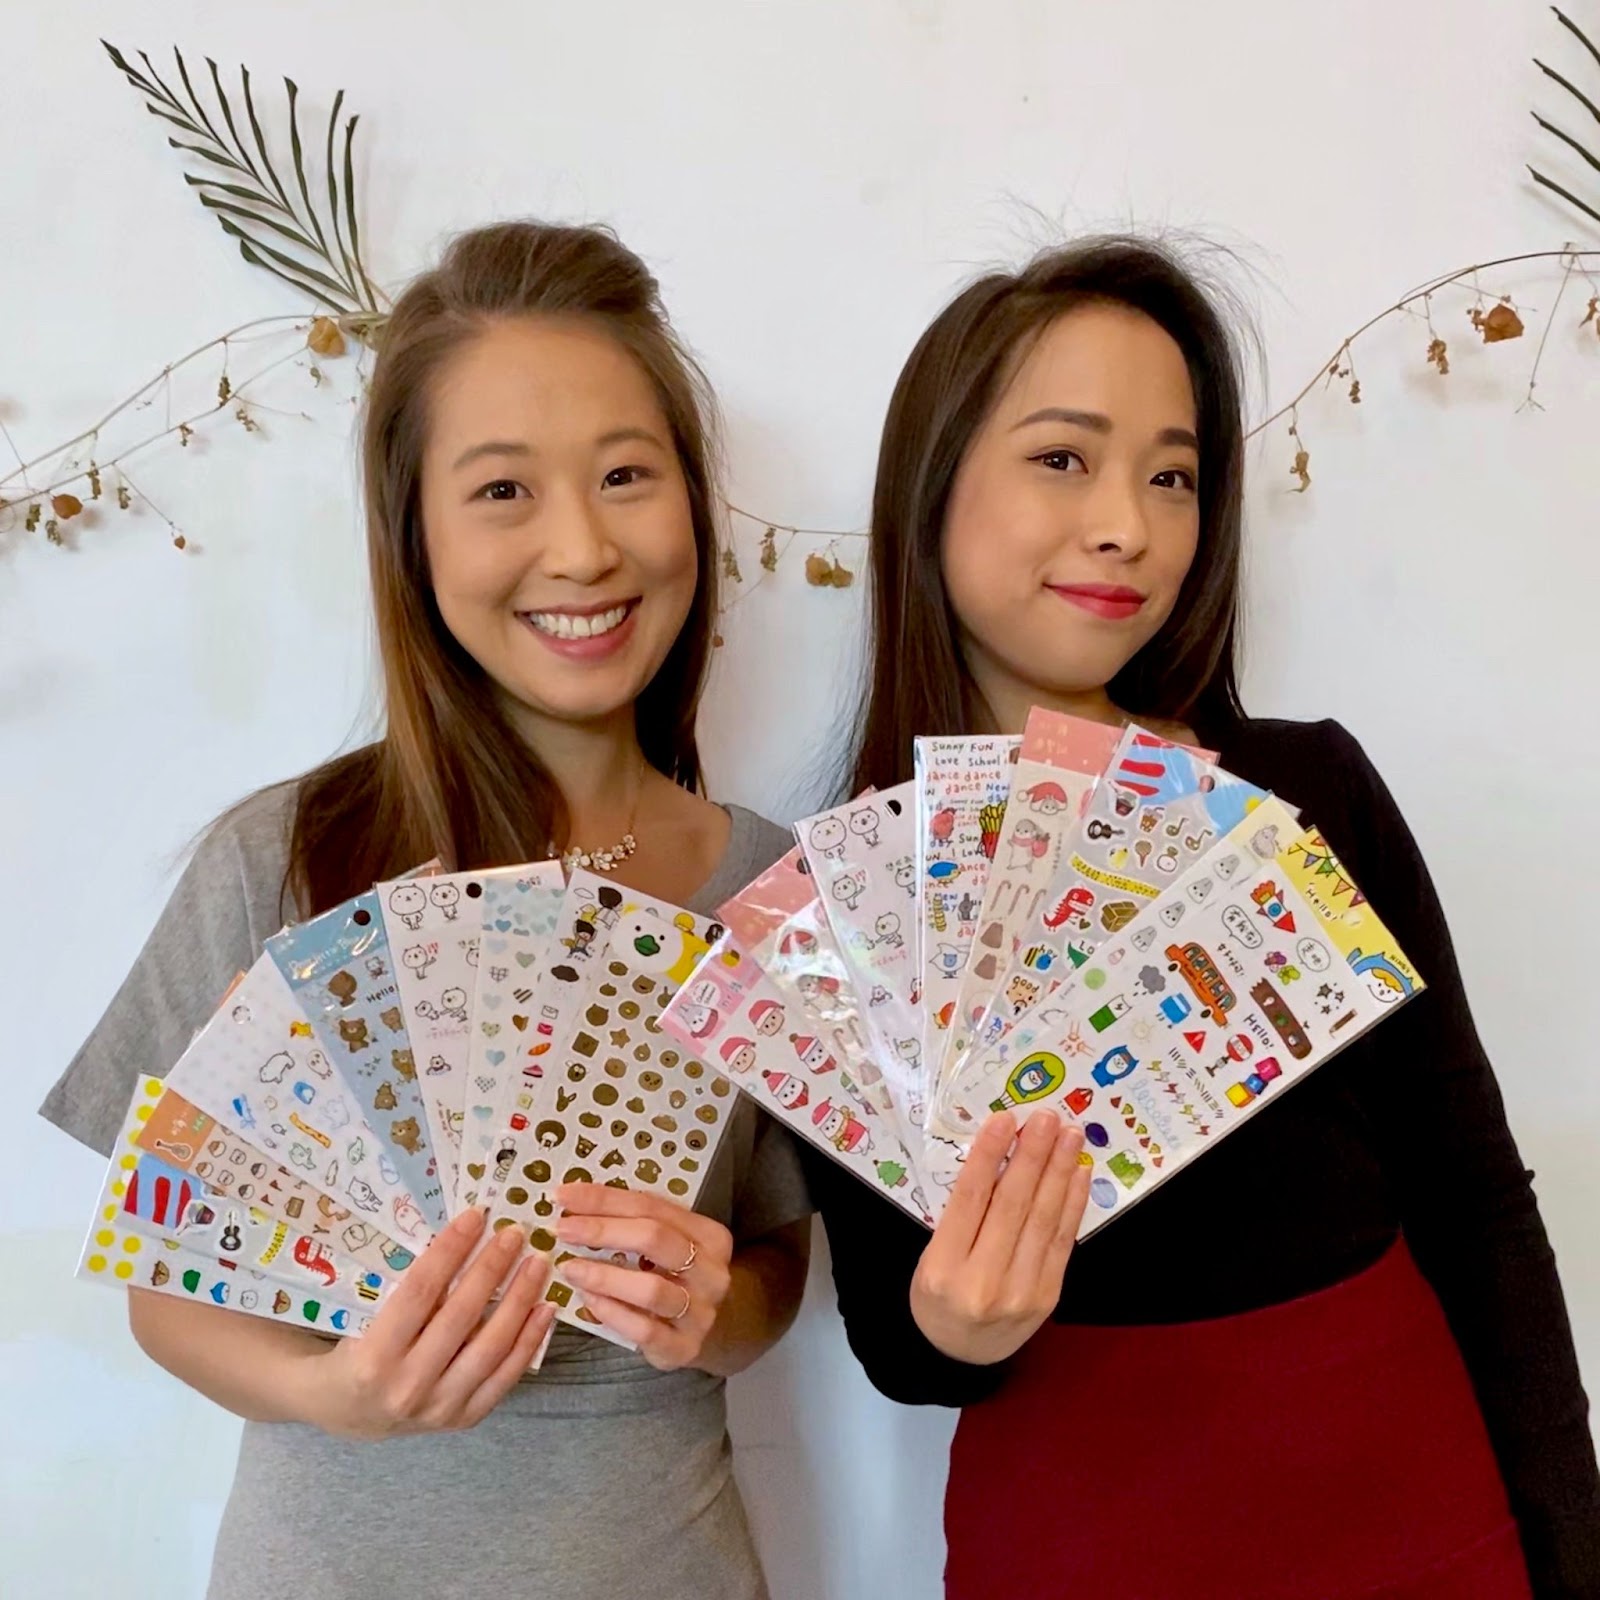 SmileABCs Sticky Rice Sisters – The image shows Koyun and Cochin smiling side by side, each displaying several packs of stickers.